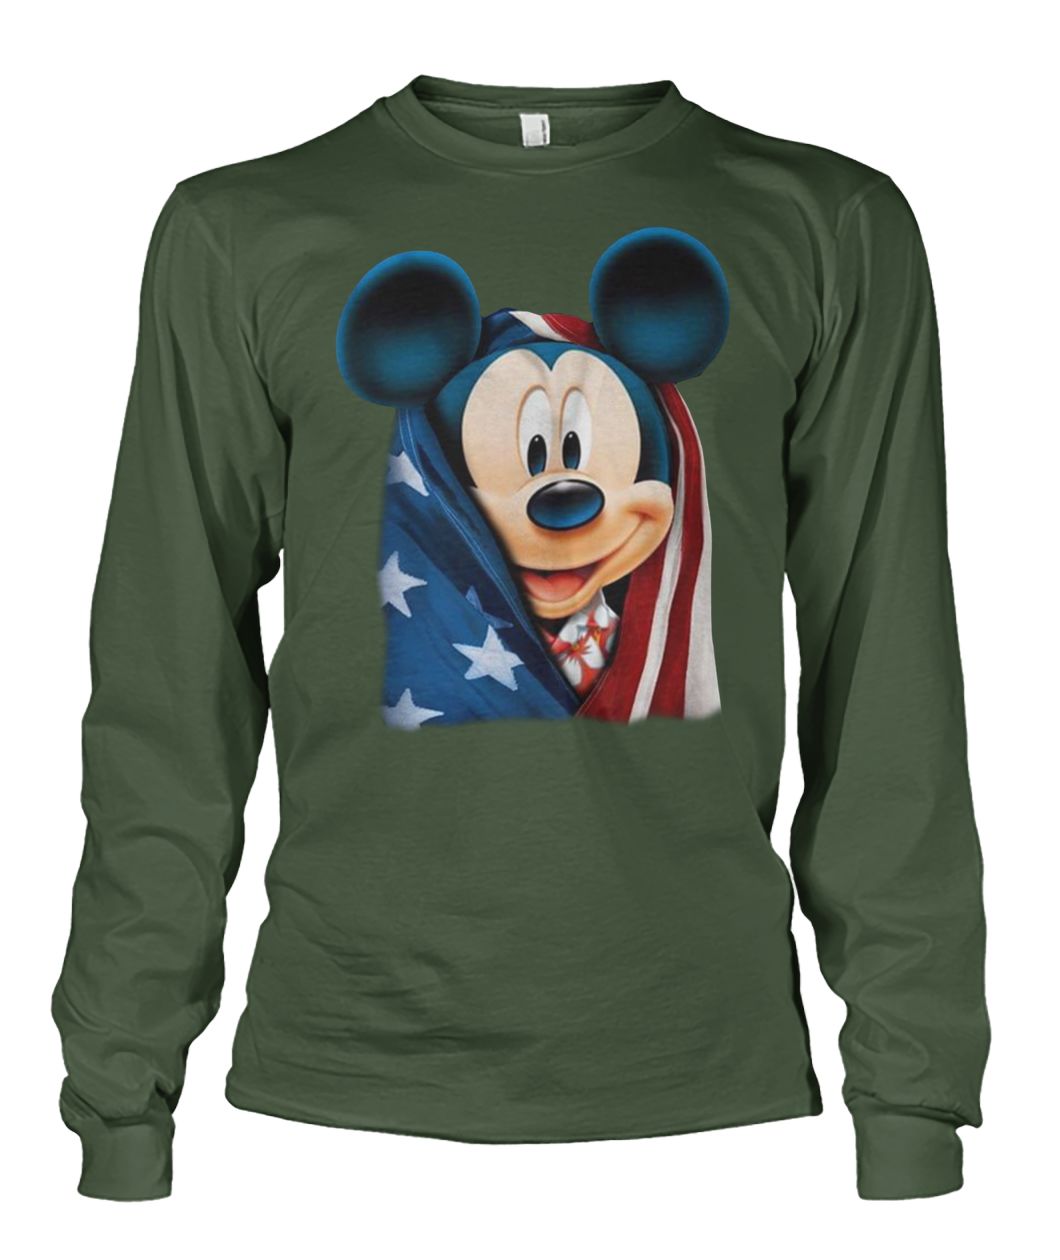 American flag mickey mouse 4th of july unisex long sleeve